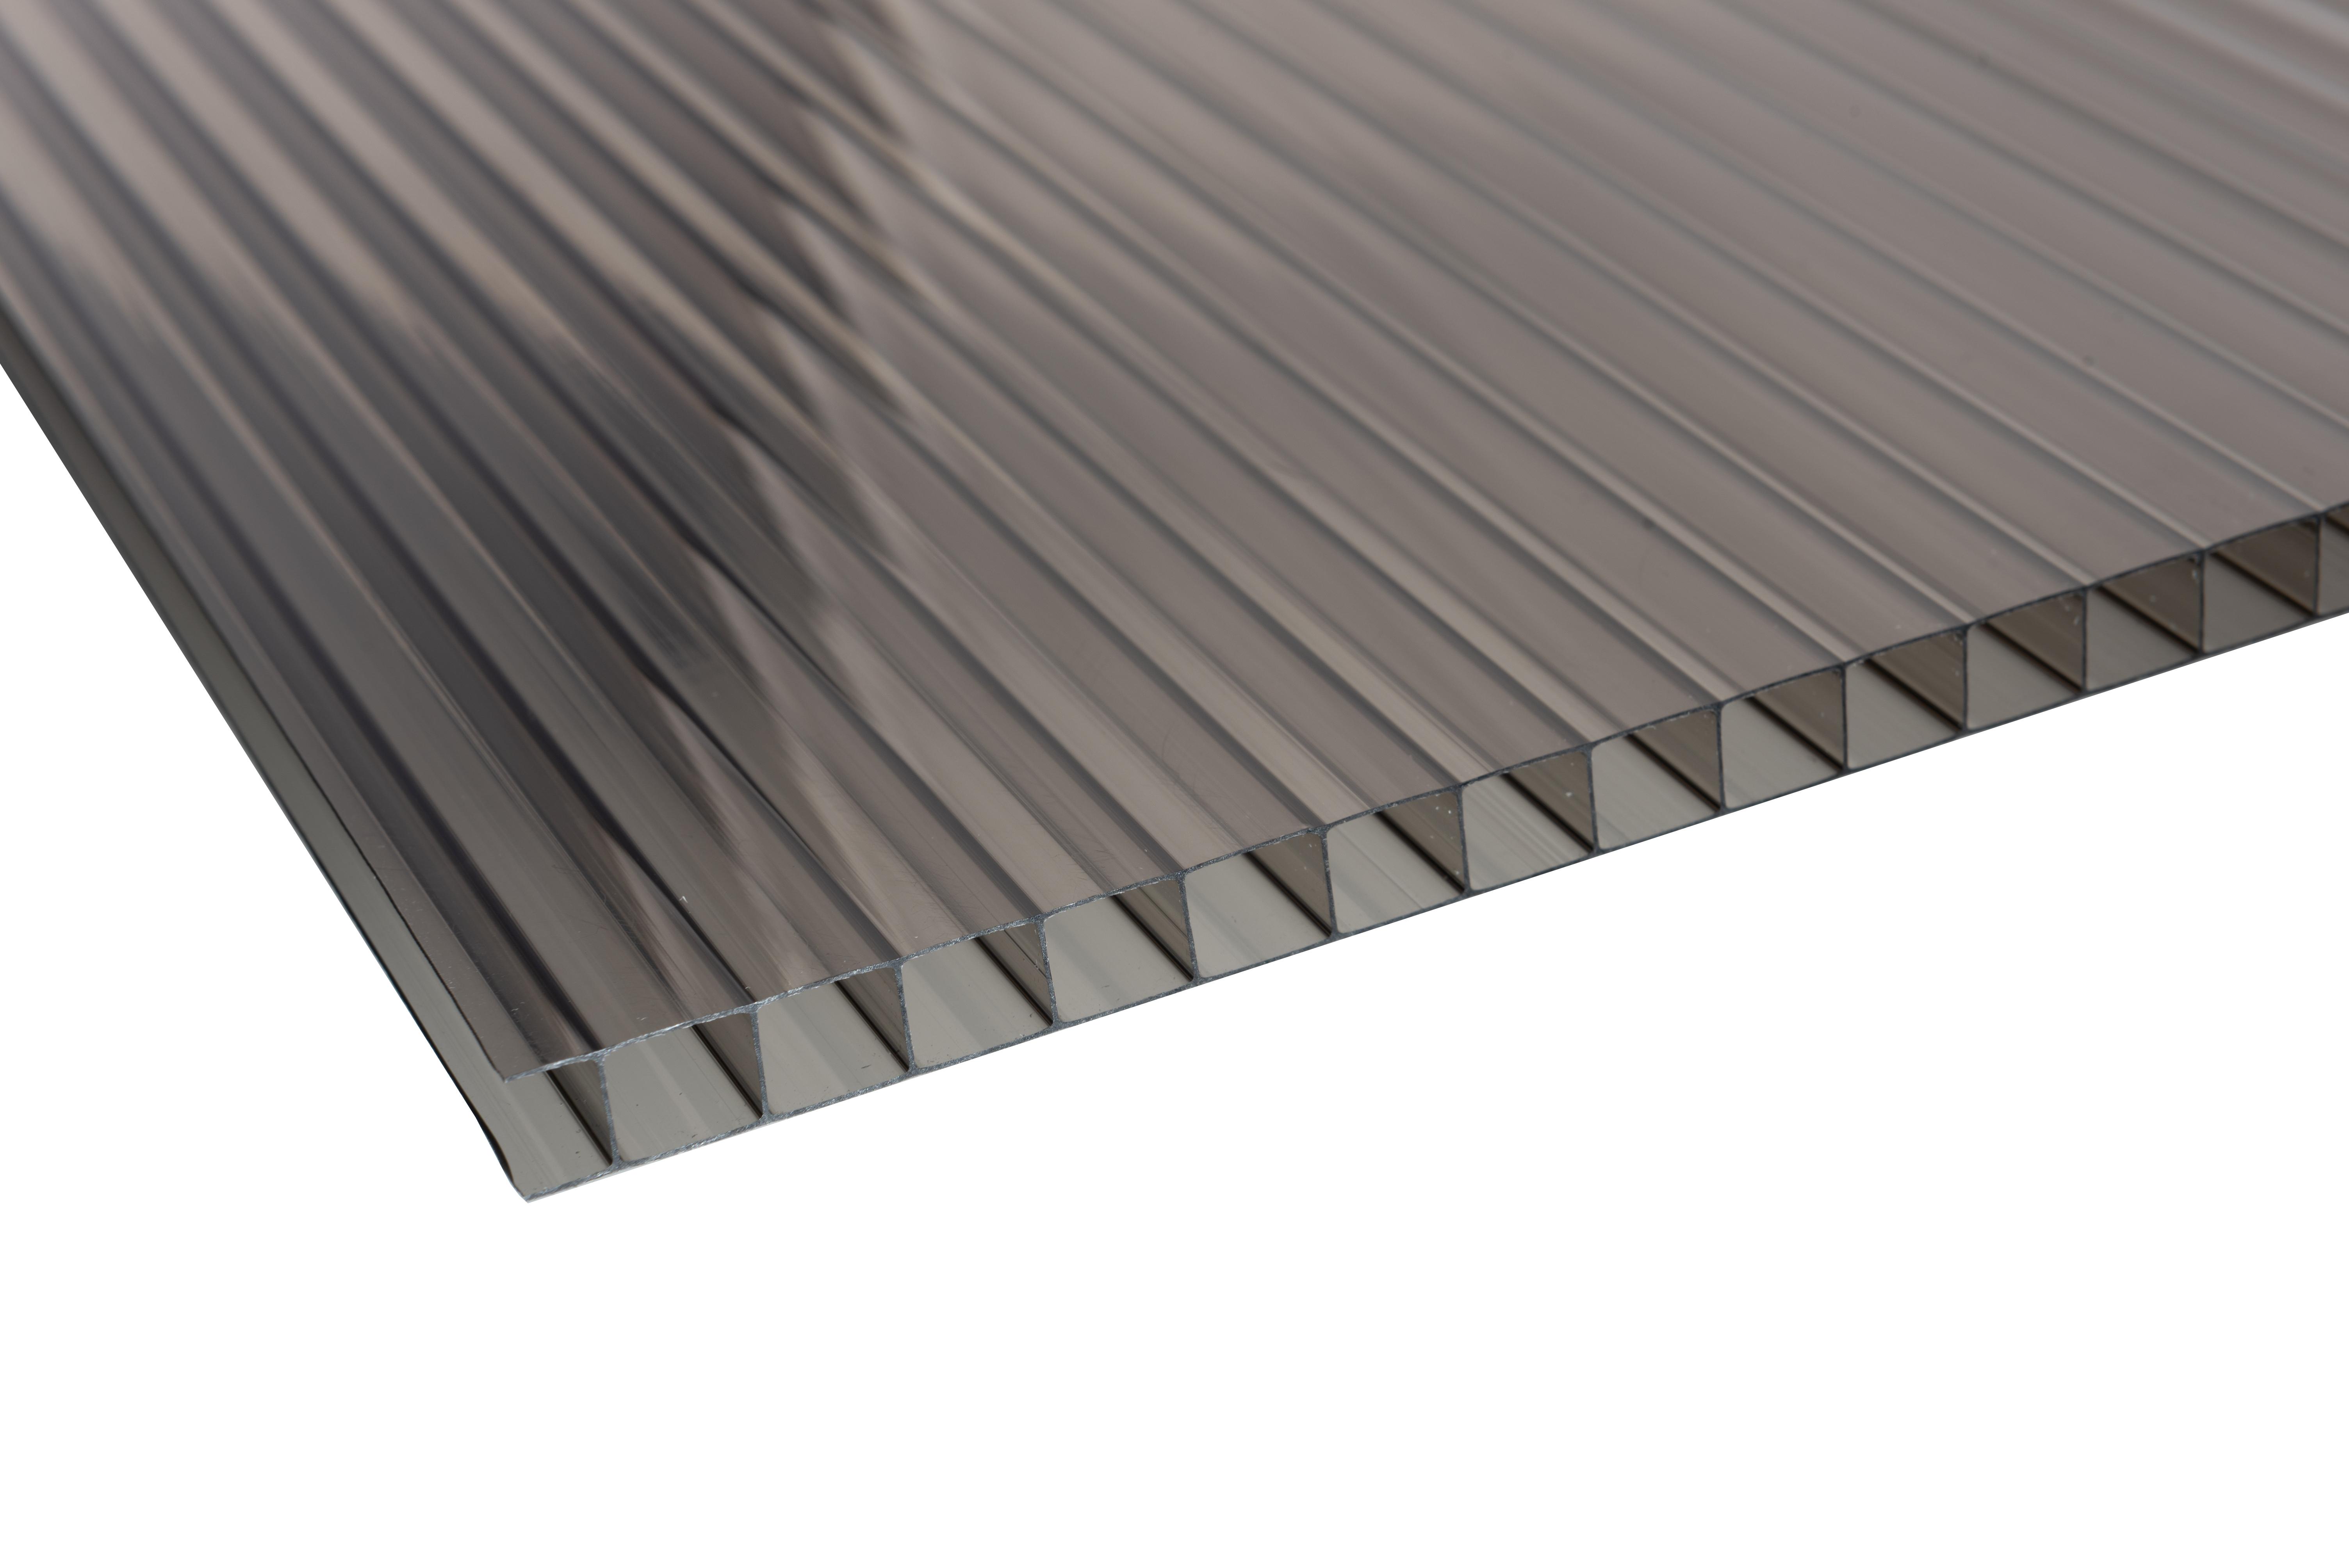 Image of 10mm Bronze Multiwall Polycarbonate Sheet - 2500 x 1050mm